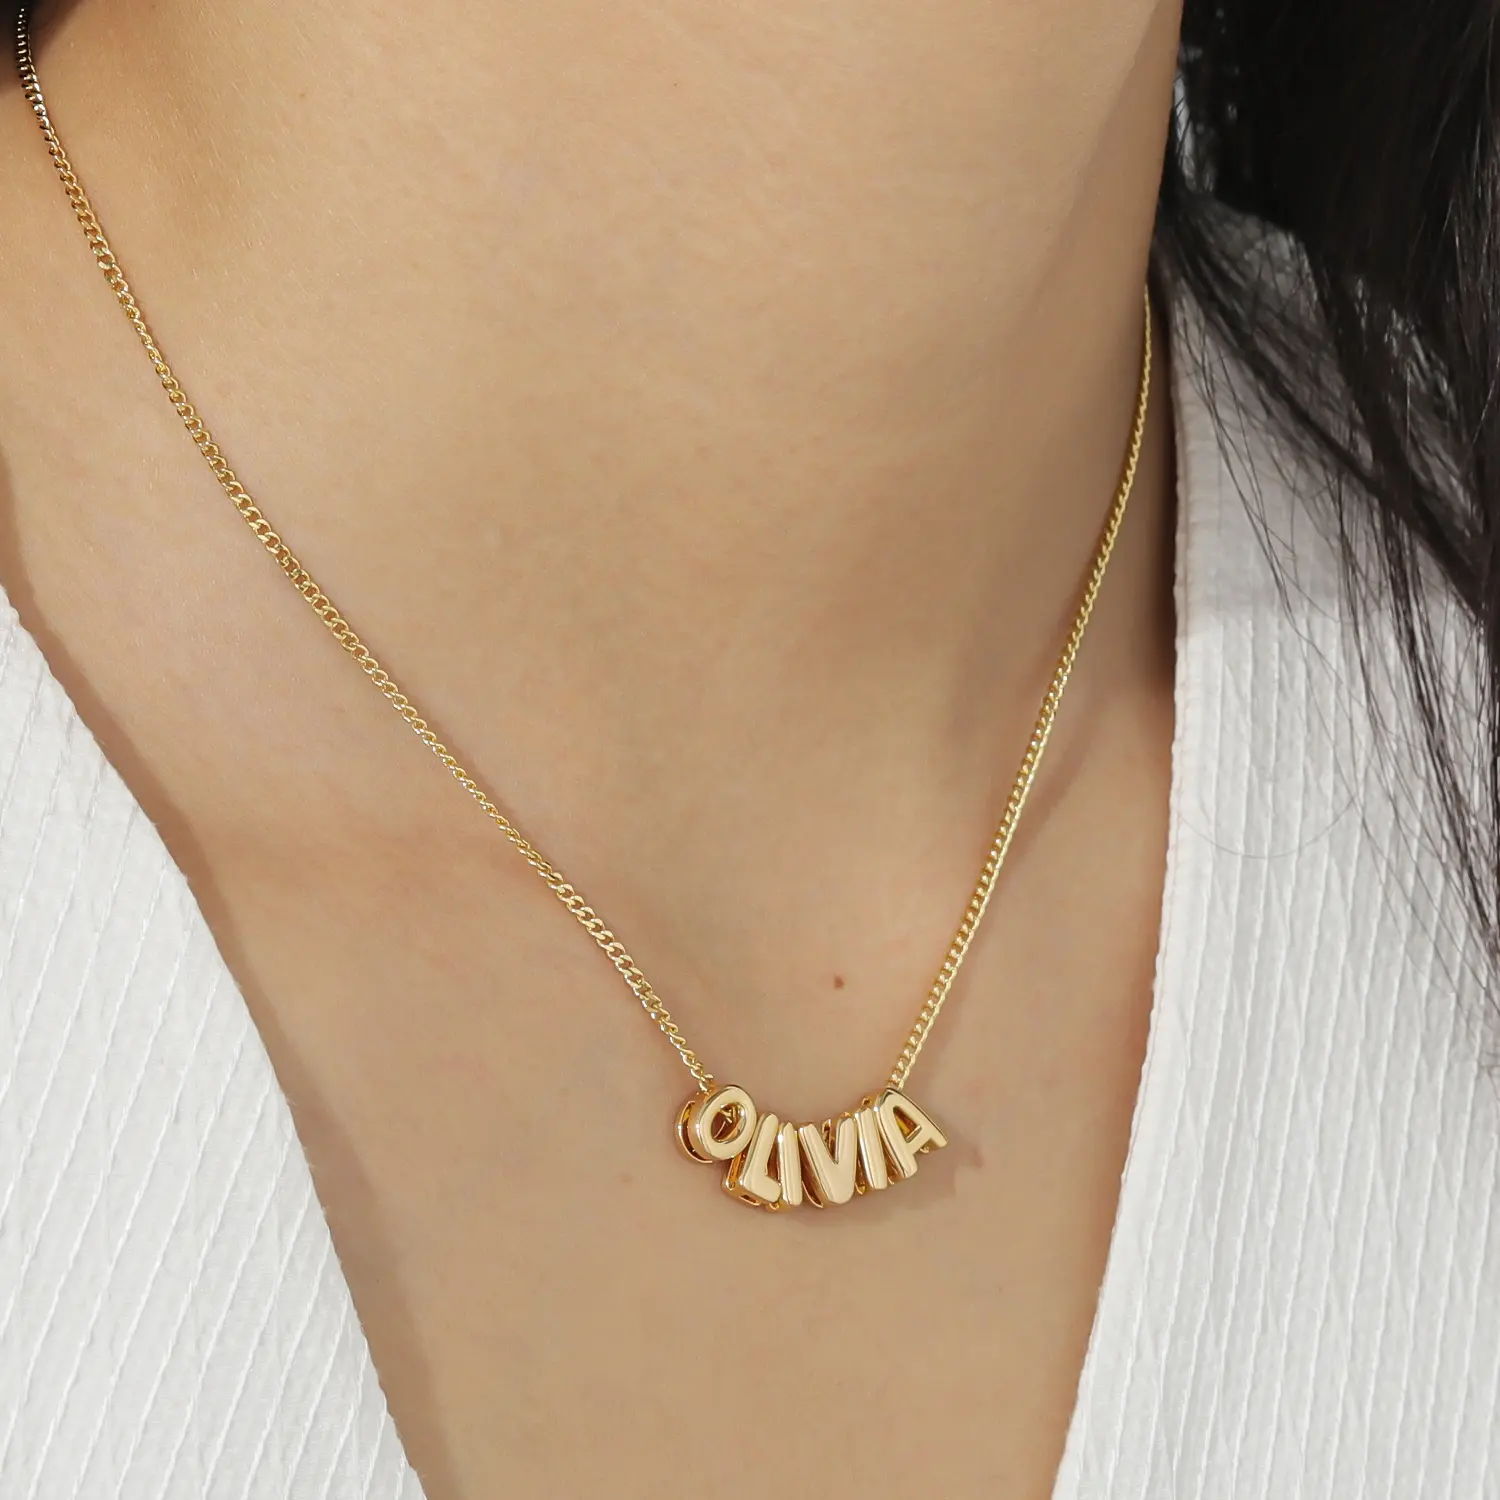 3D Bubble Letter Charm Custom Name Jewelry Initial Balloon Letters Pendant jewelry for women 18K Gold Plate